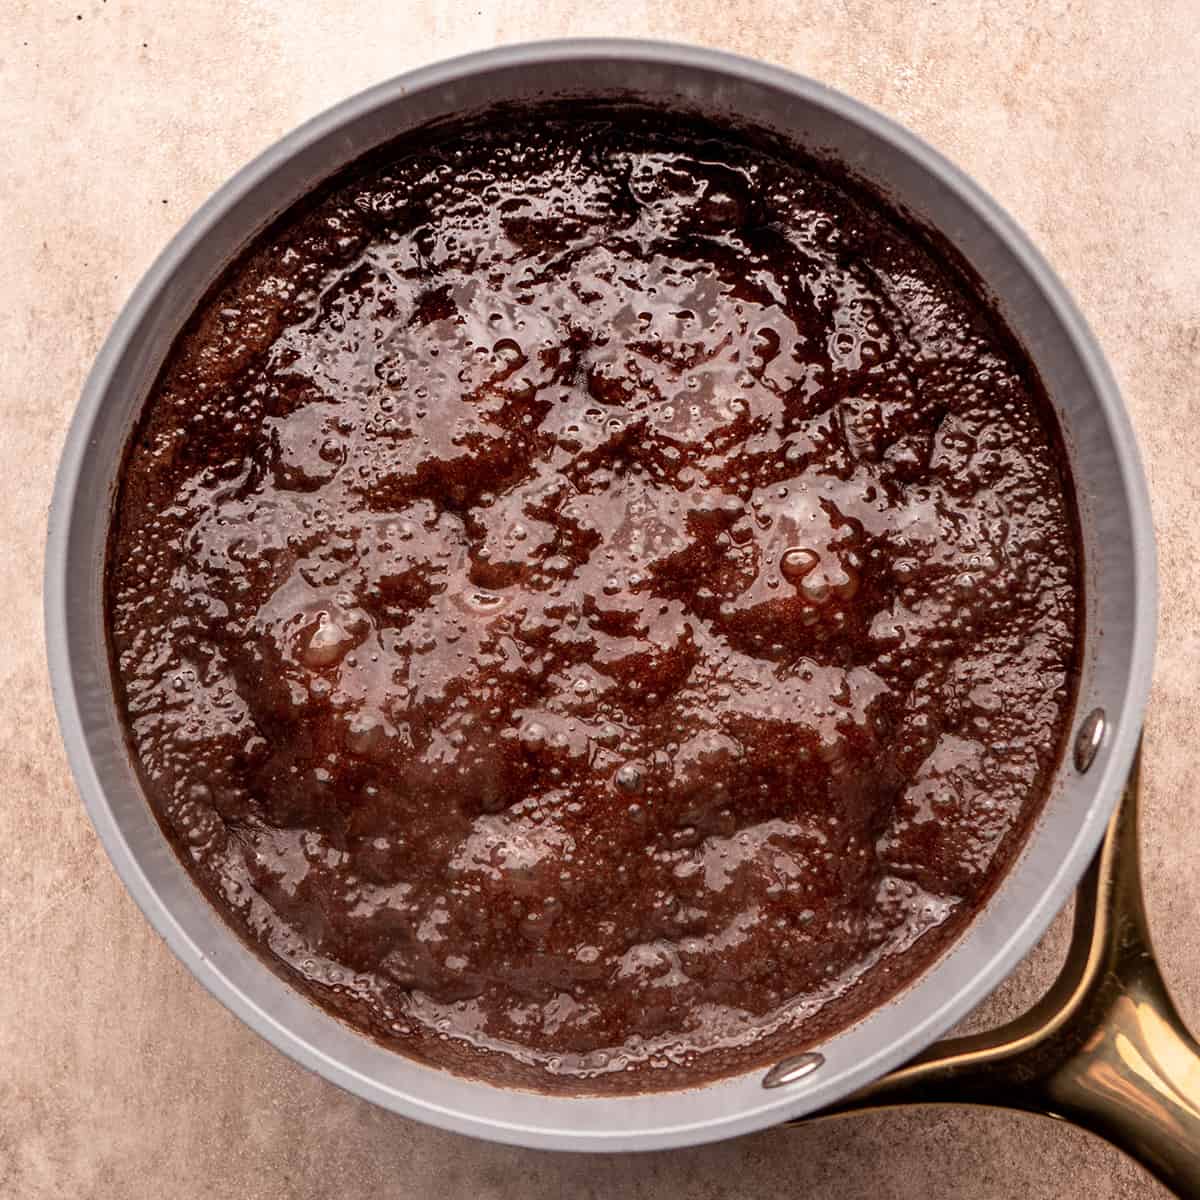 fudge mixture coming to a boiling in a saucepan